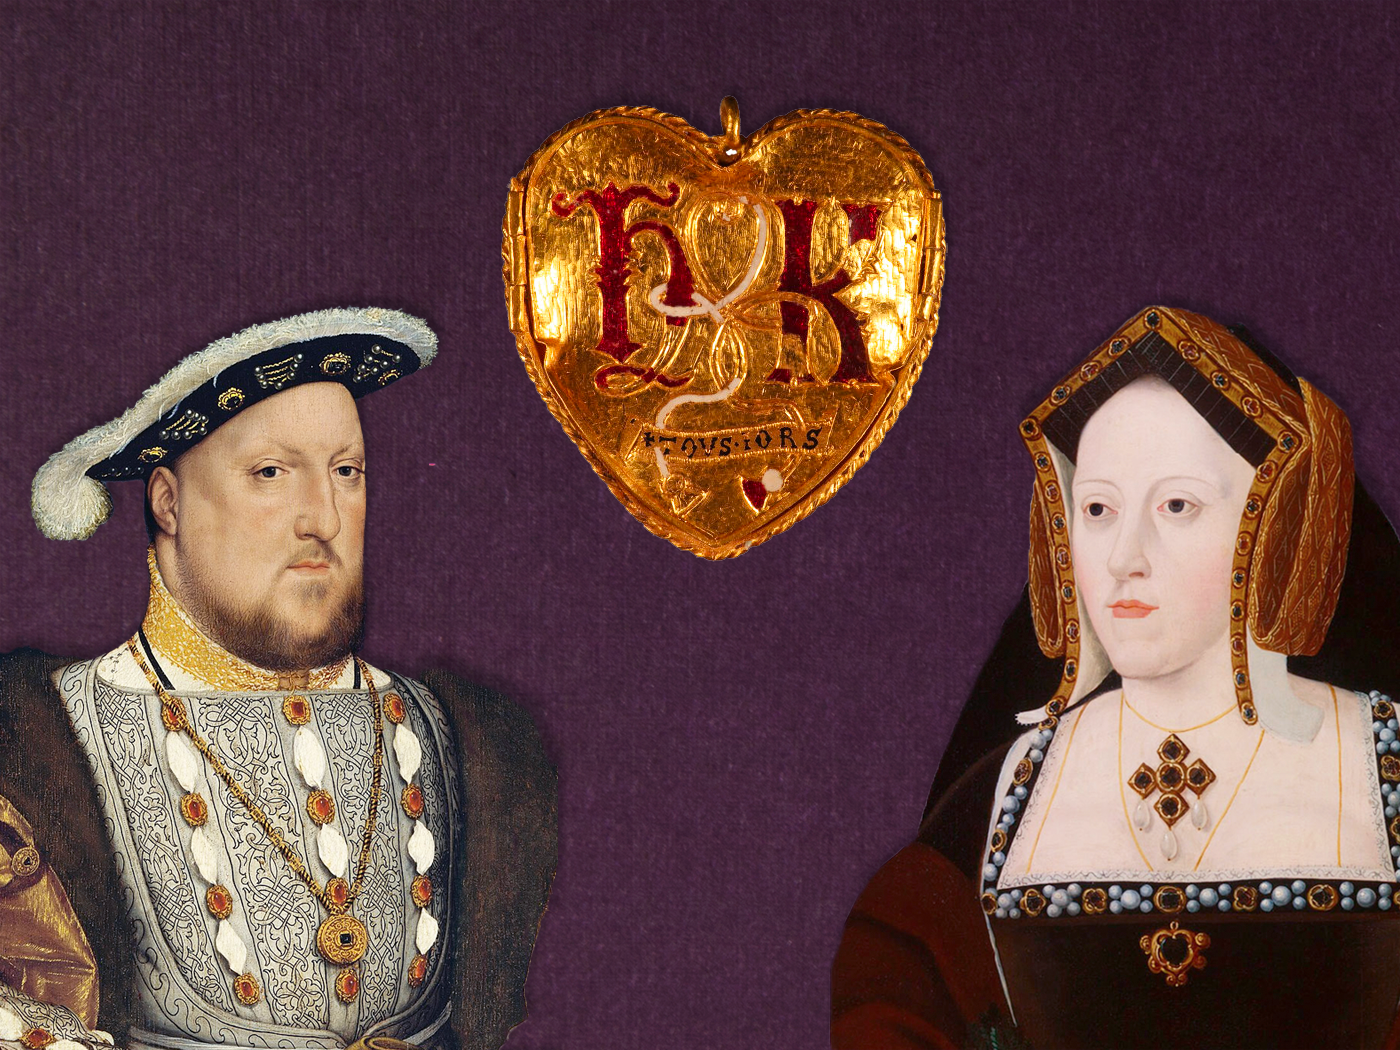 Metal Detectorist Discovers Rare Gold Pendant Celebrating Henry VIII's First Marriage